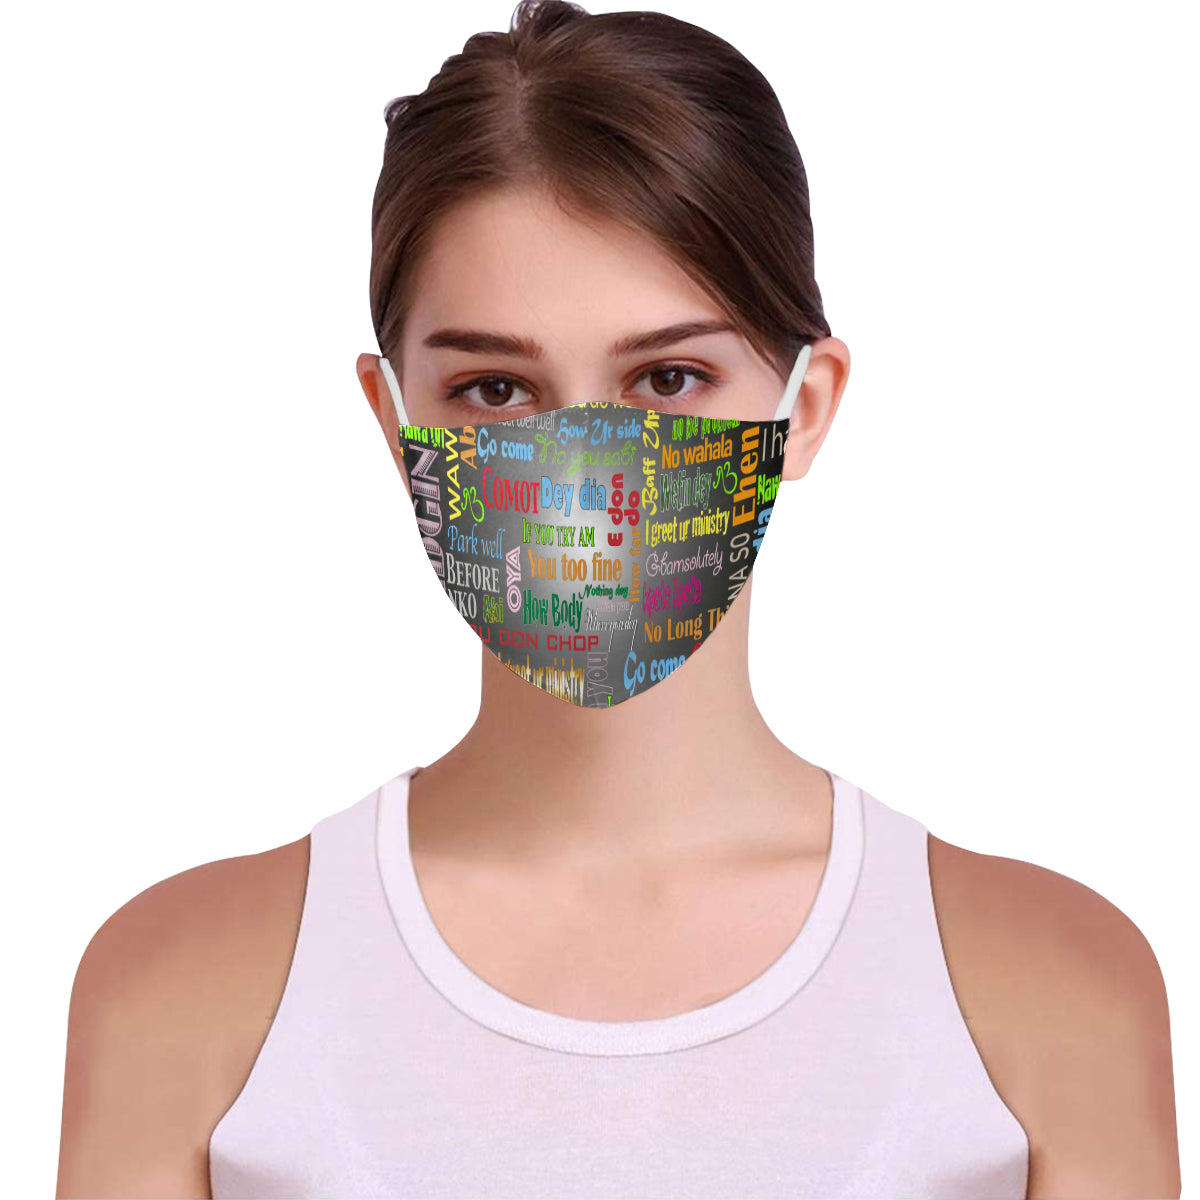 AfriBix Pidgin Print Galaxy Cotton Fabric Face Mask with Filter Slot & Adjustable Strap (Pack of 5) - Non-medical use